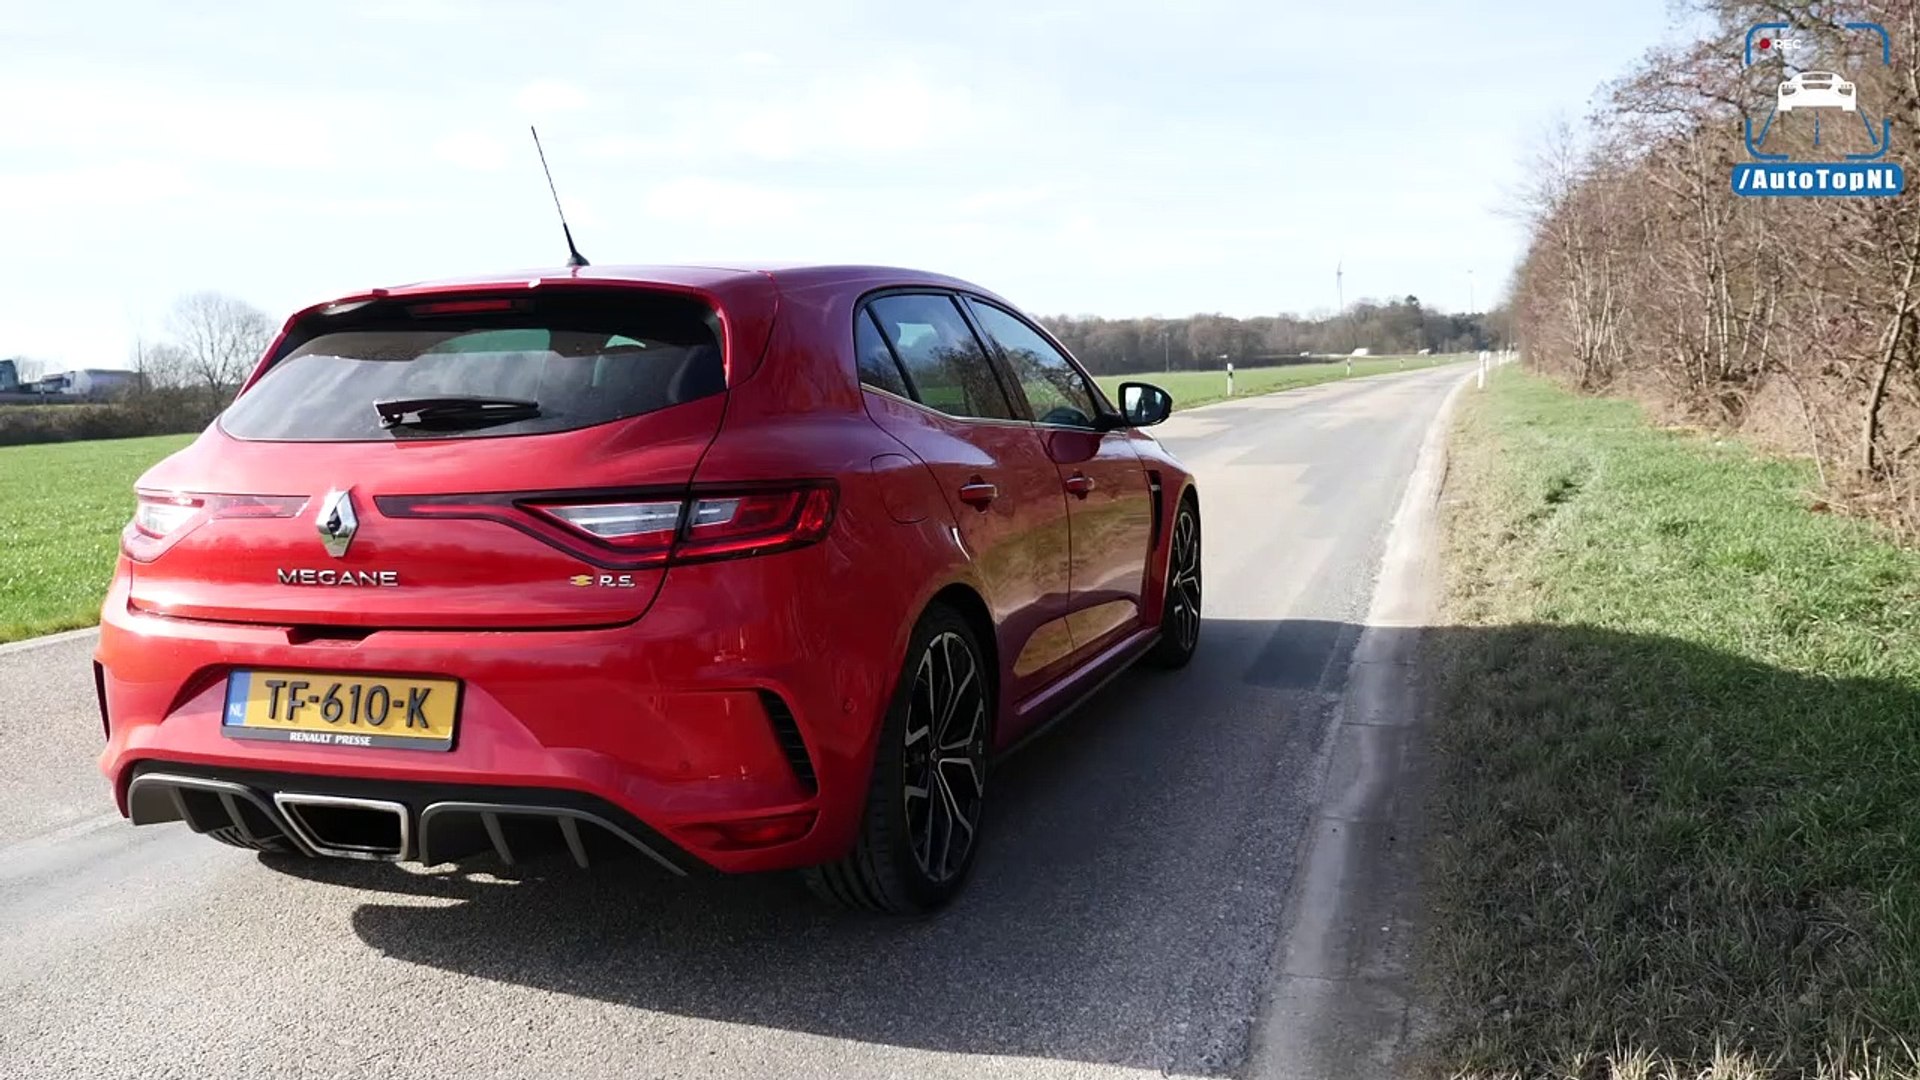 RENAULT MEGANE RS 2019 ACCELERATION & TOP SPEED 0-250km/h by AutoTopNL